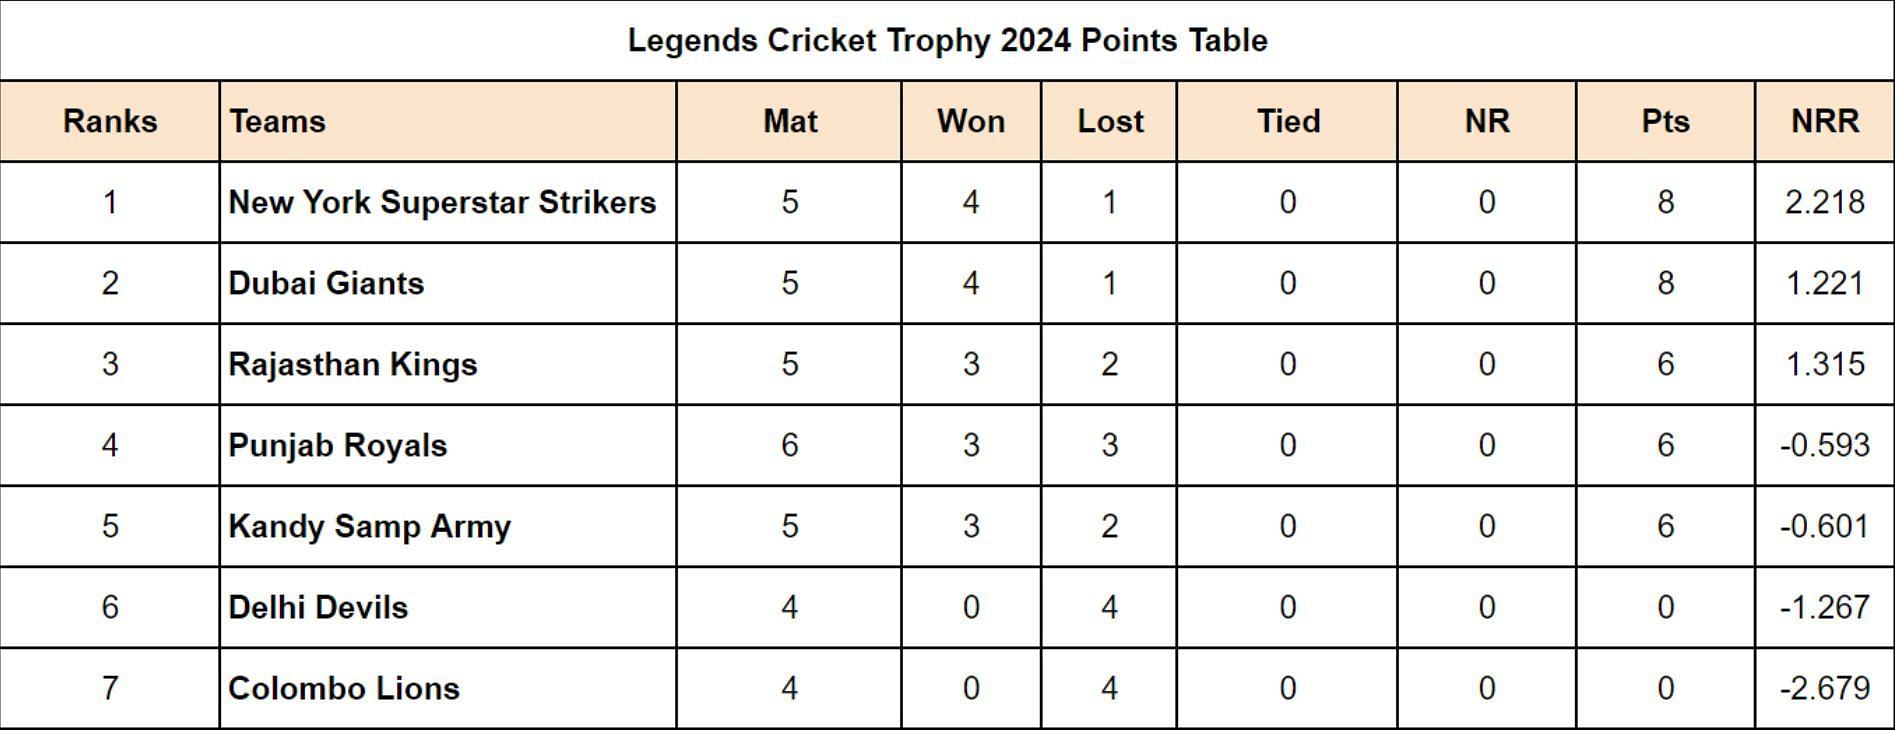 Legends Cricket Trophy 2024 Points Table Updated after Match 17